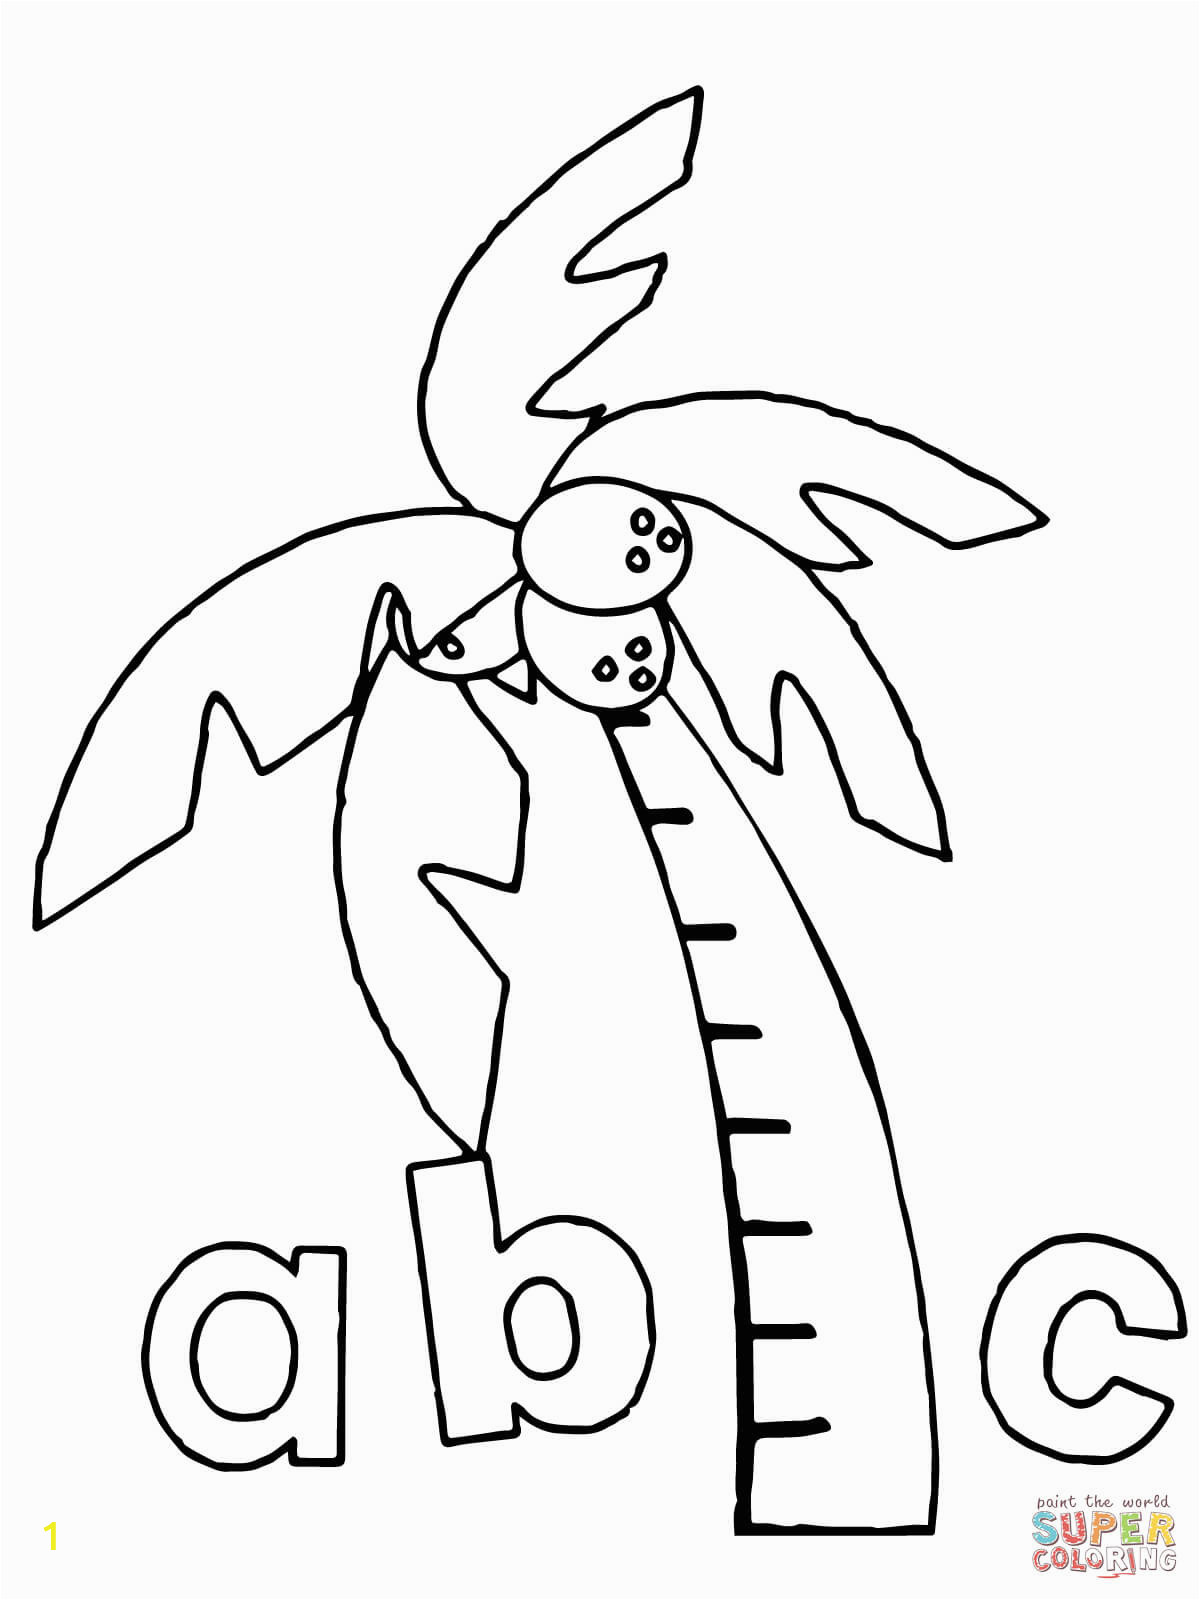 chicka chicka boom boom coloring pages